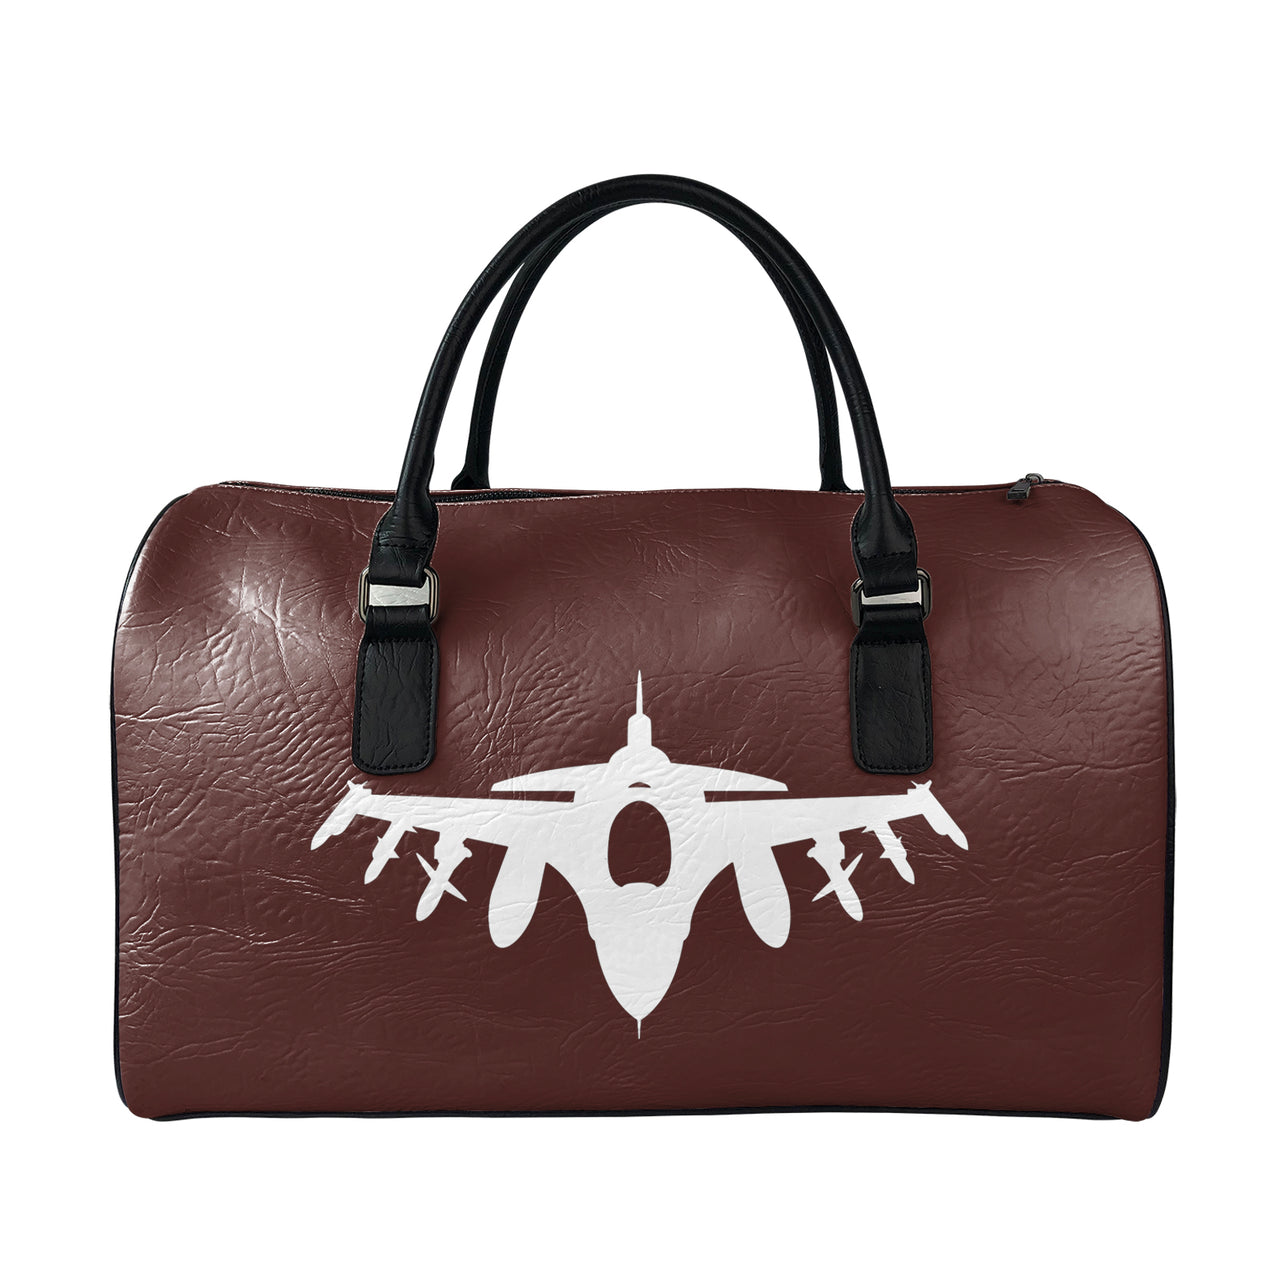 Fighting Falcon F16 Silhouette Designed Leather Travel Bag